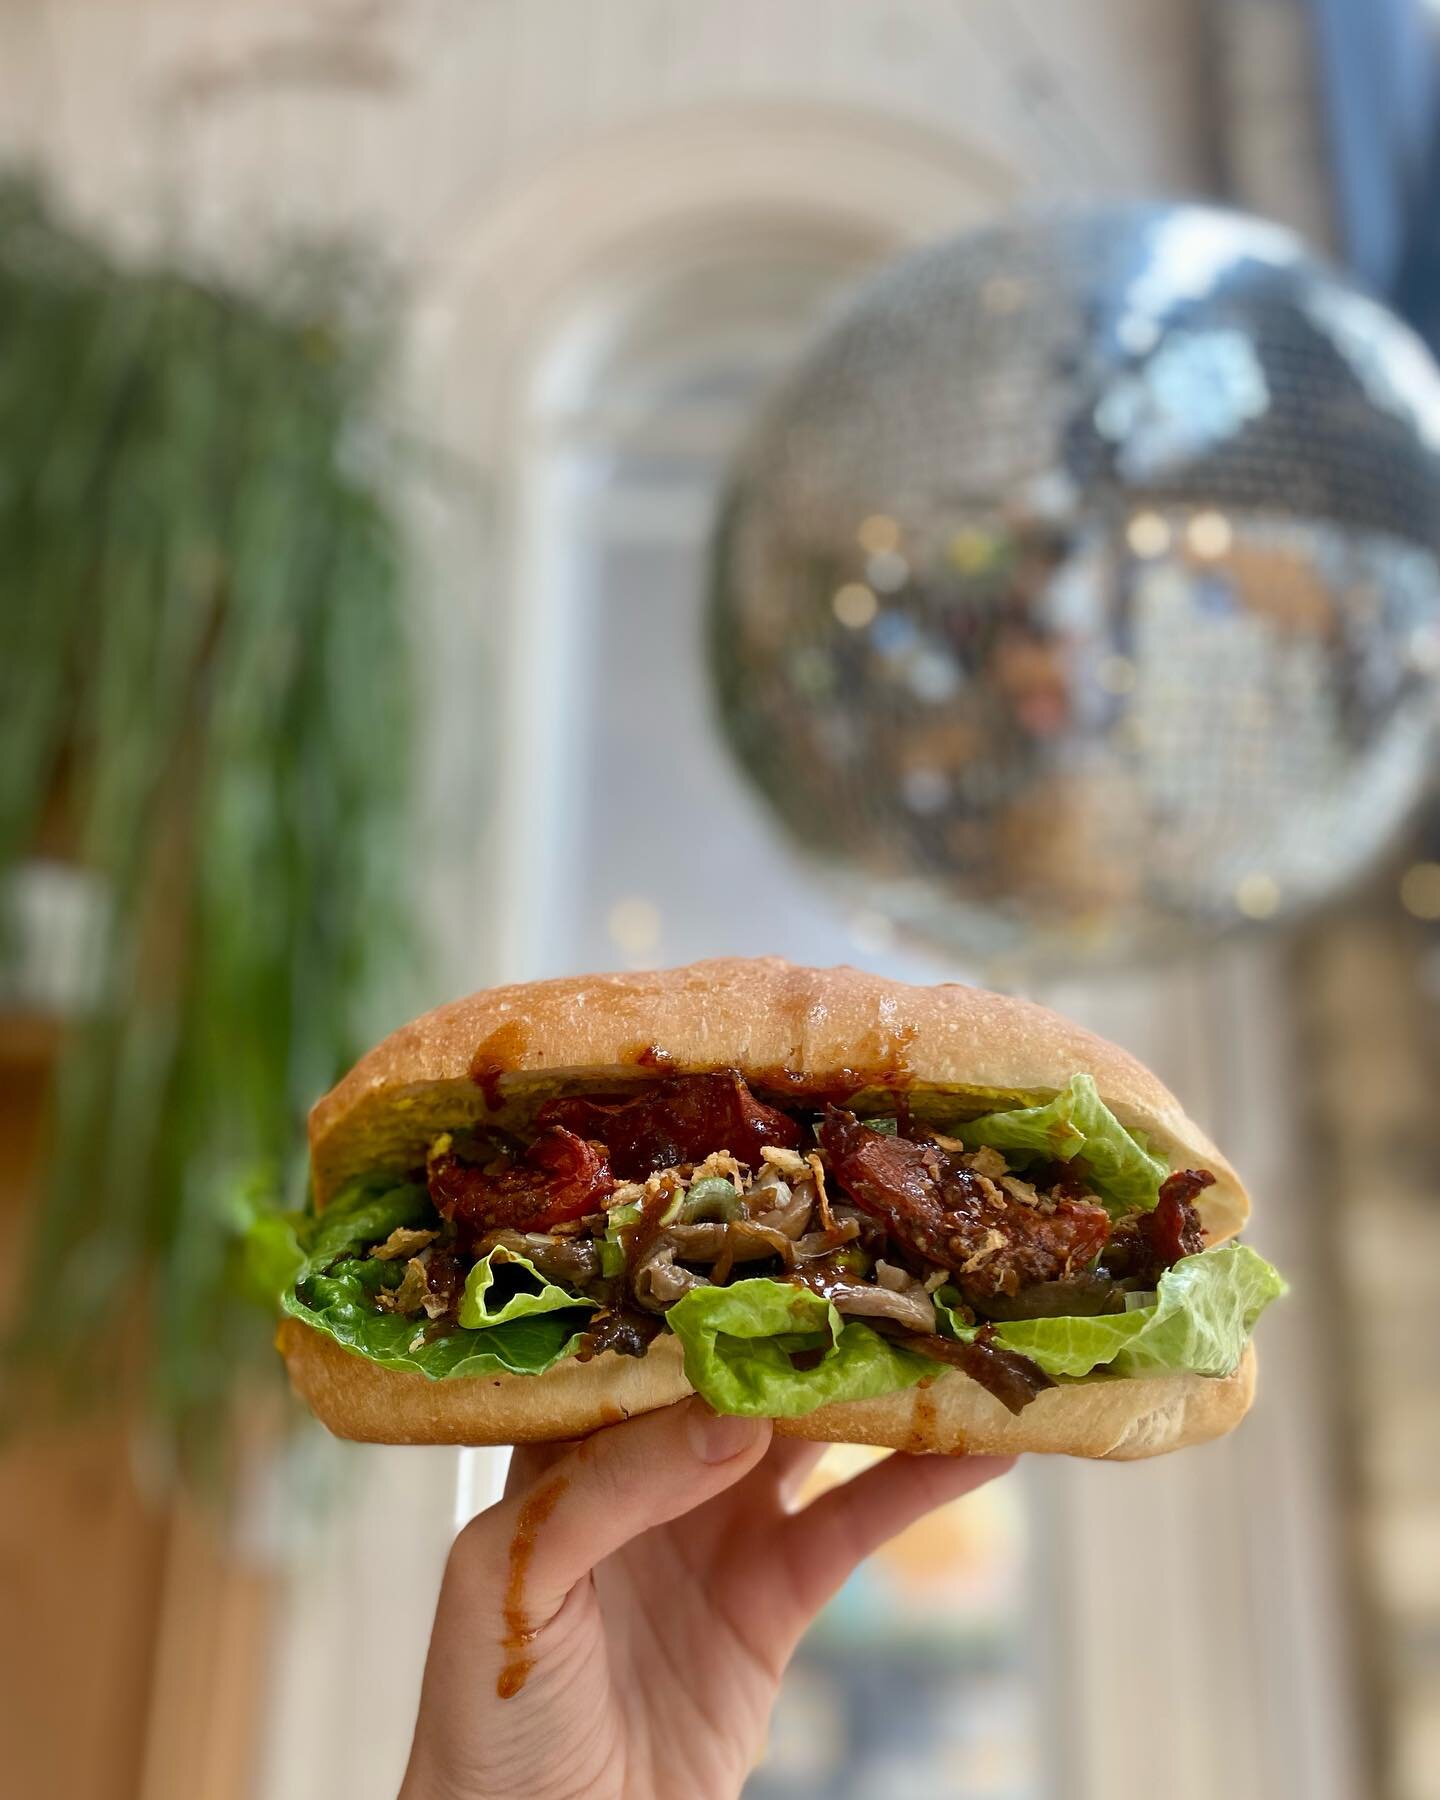 🌶WE&rsquo;VE BROUGHT BACK HARRY&rsquo;S THAI CHILLI SUB🌶

Just in Thai-m for lunch. 
So bad.
Please send pun suggestions. 

Oyster mushrooms, chilli caramel, lettuce, roasted toms, lettuce and eggy mayoooo!!

It&rsquo;s SUB-lime. Sorry. 

#badpuns 